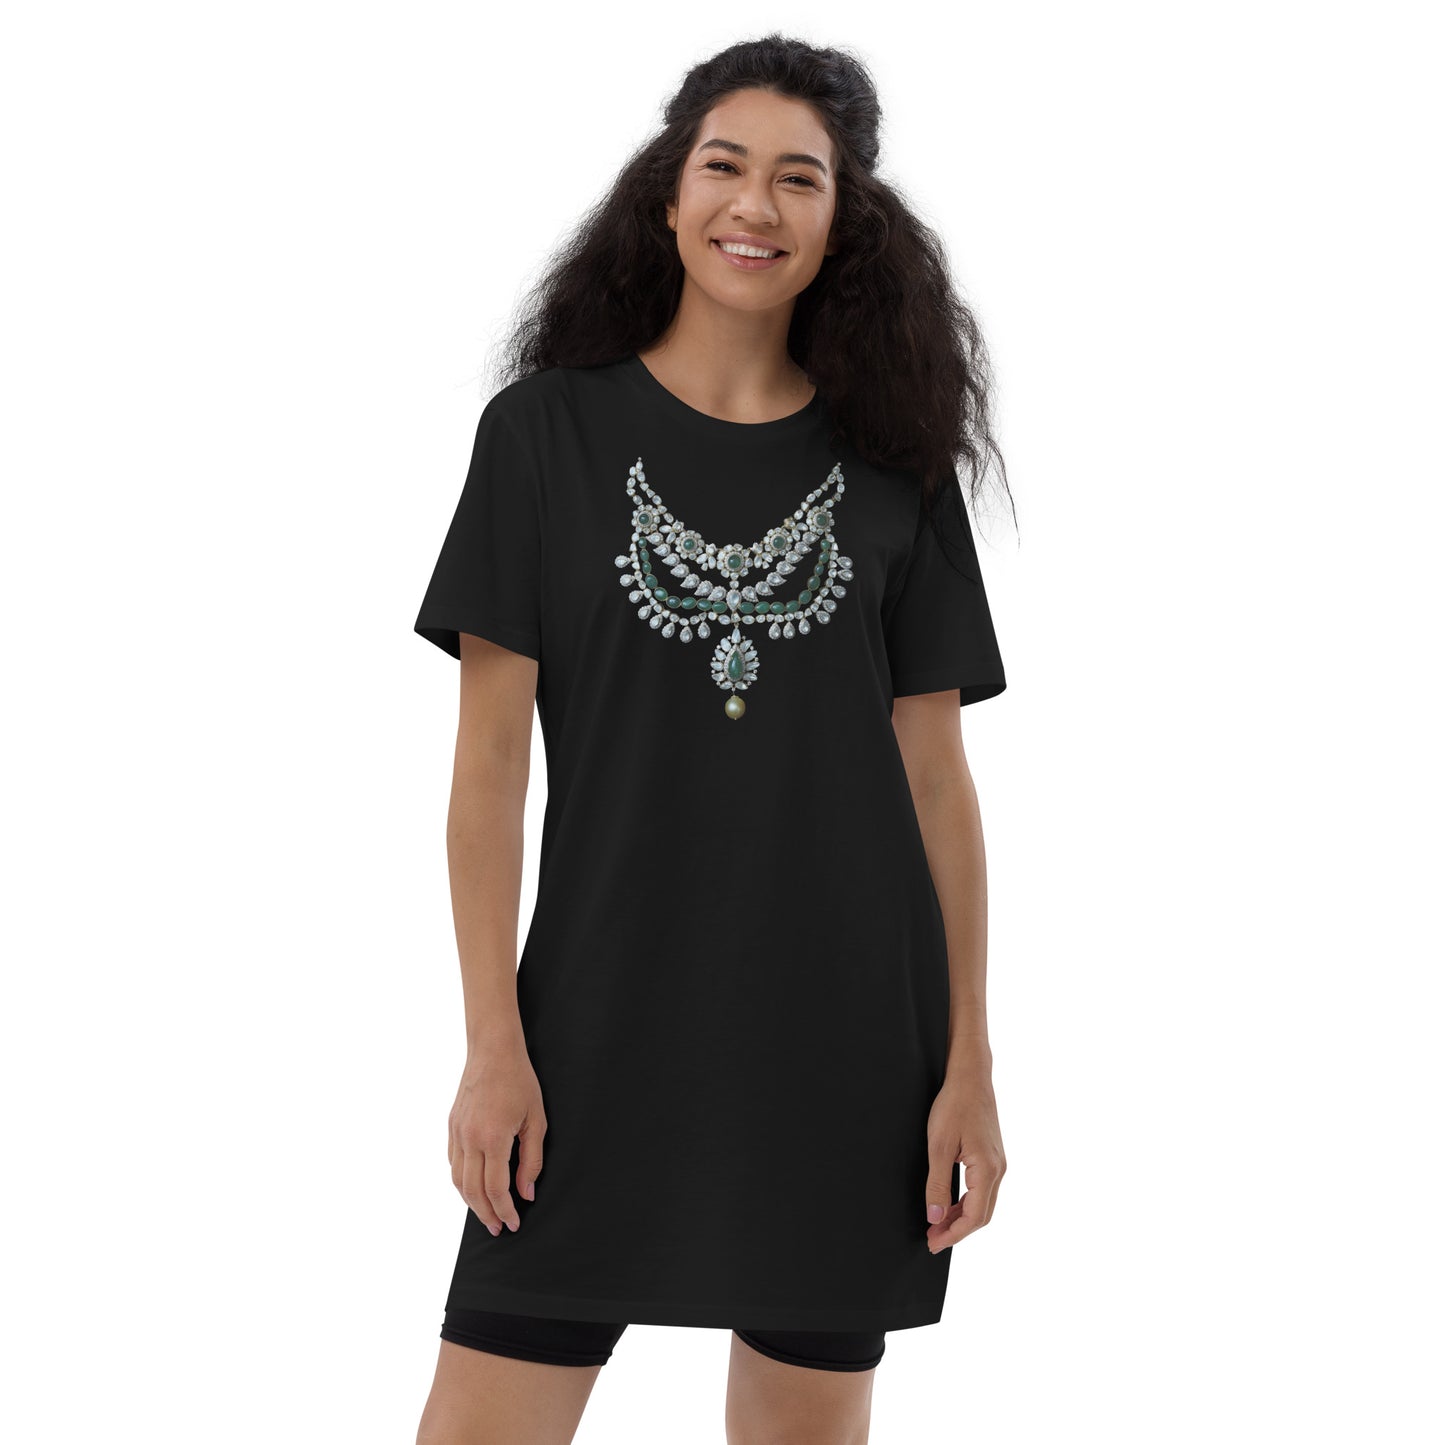 Women's Eco Organic Cotton T-shirt Top Dress with Necklace